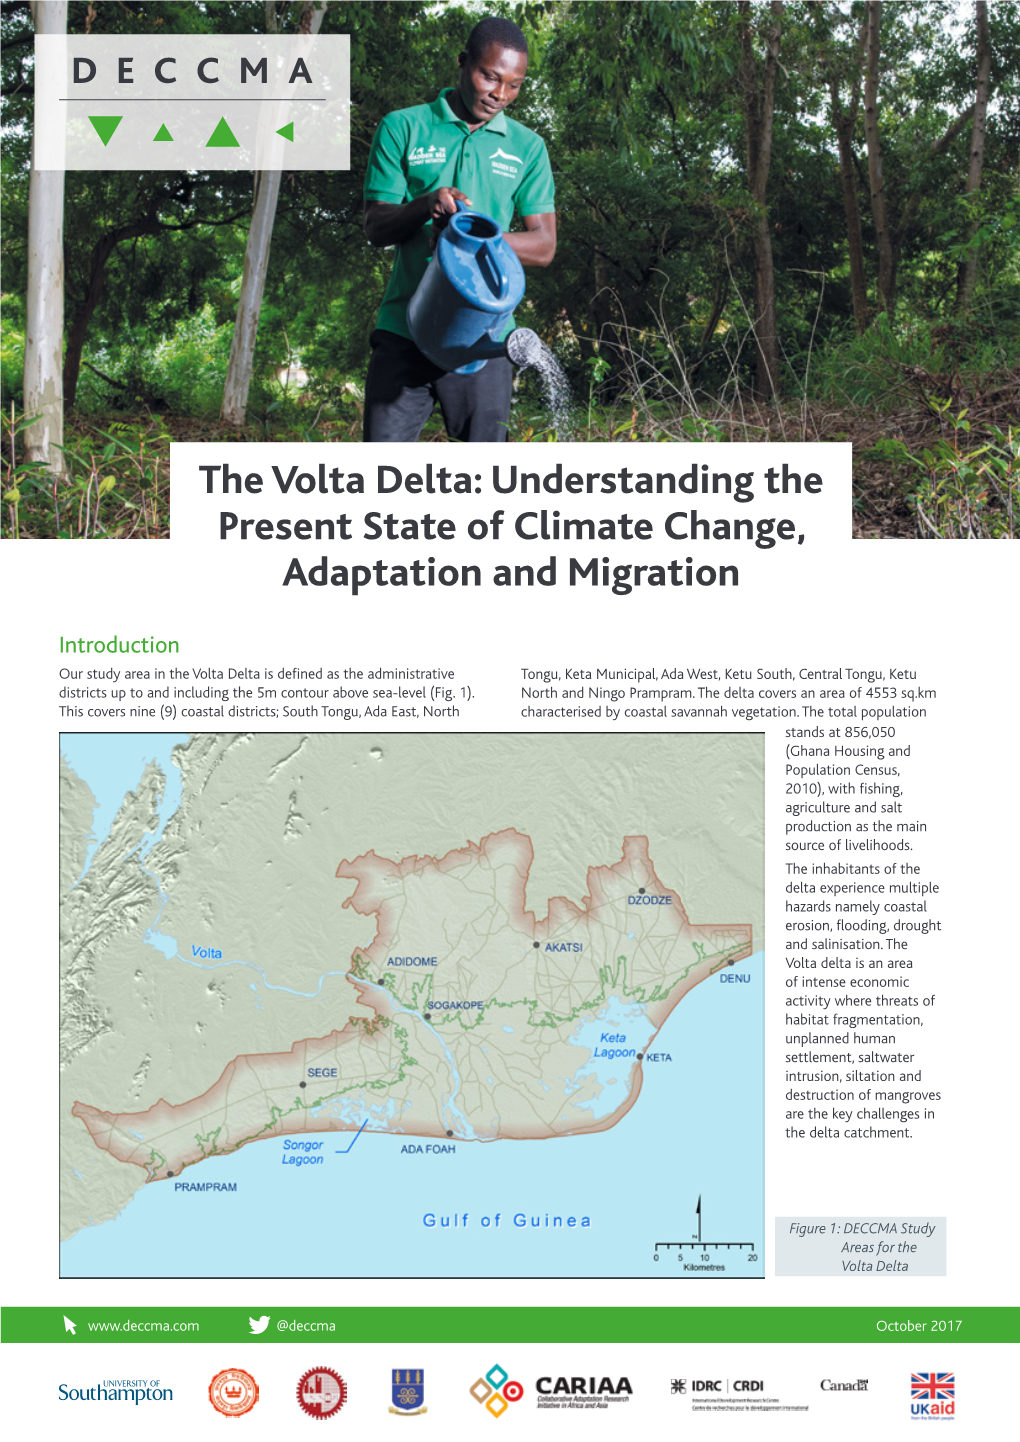 The Volta Delta: Understanding the Present State of Climate Change, Adaptation and Migration